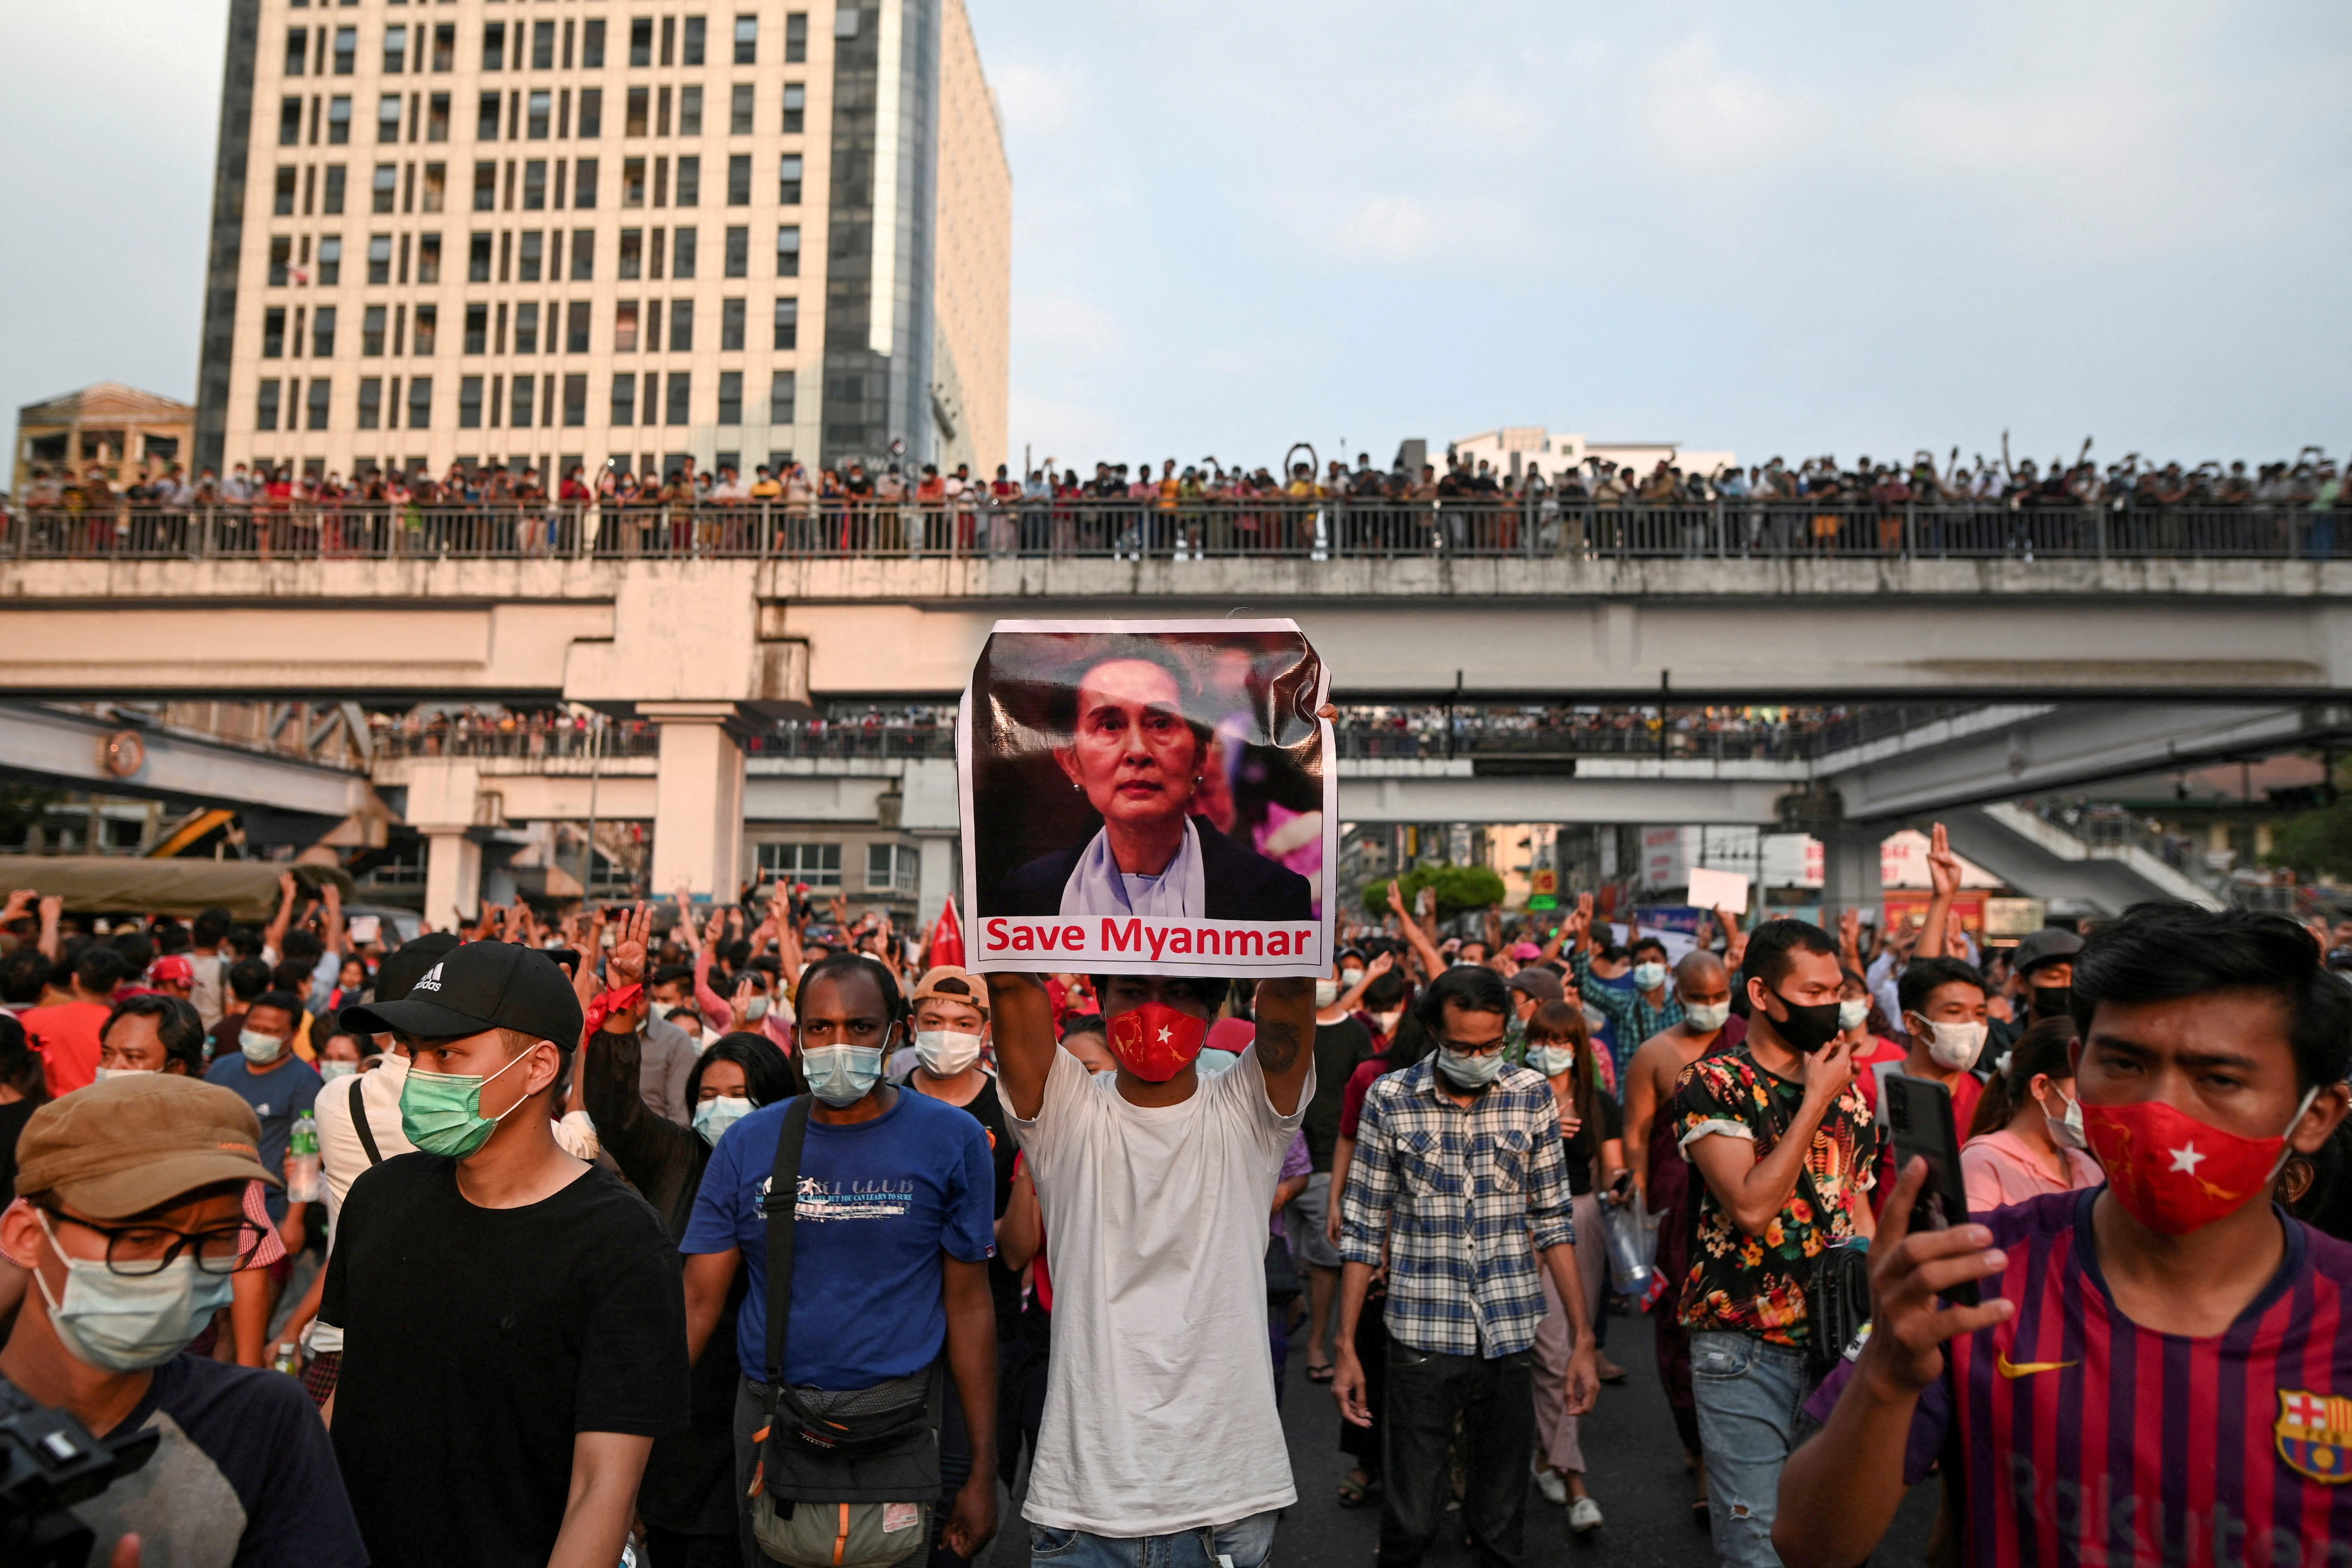 Demonstrators protest the military coup and demand the release of elected leader Aung San Suu Kyi in Yangon, Myanmar, Feb. 6, 2021. (CNS photo/Reuters)